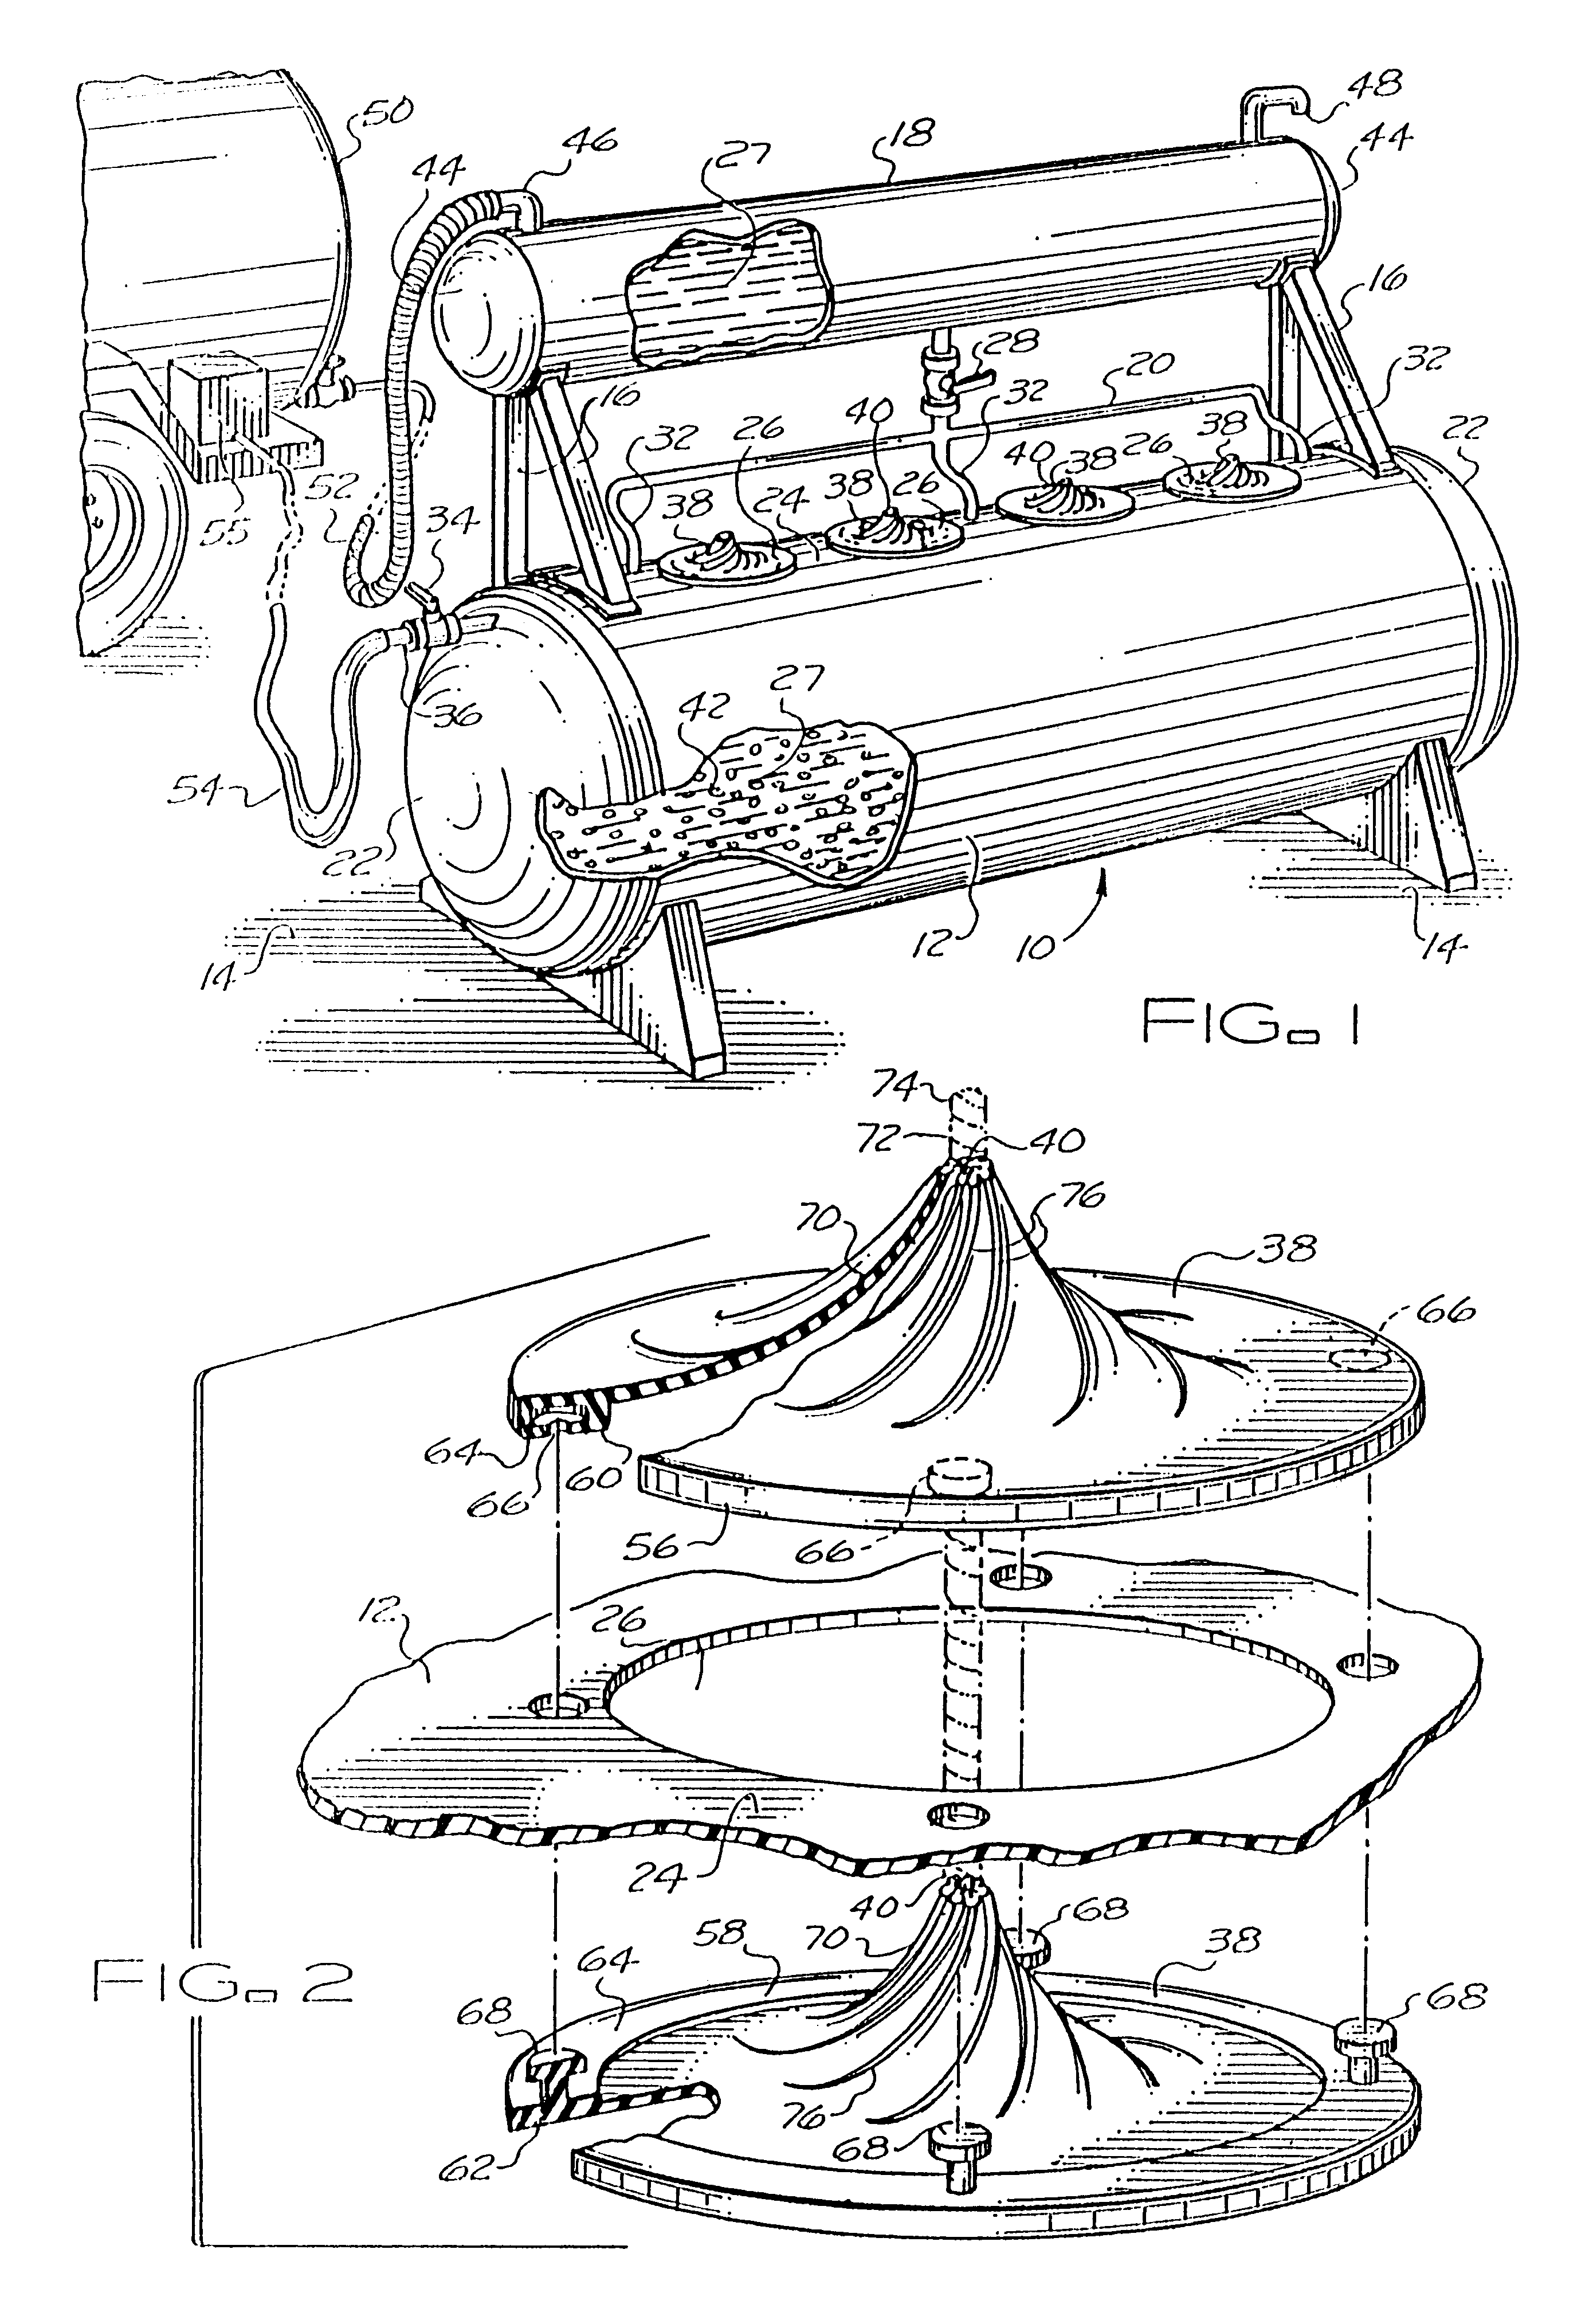 Hydroponic cultivation apparatus and method